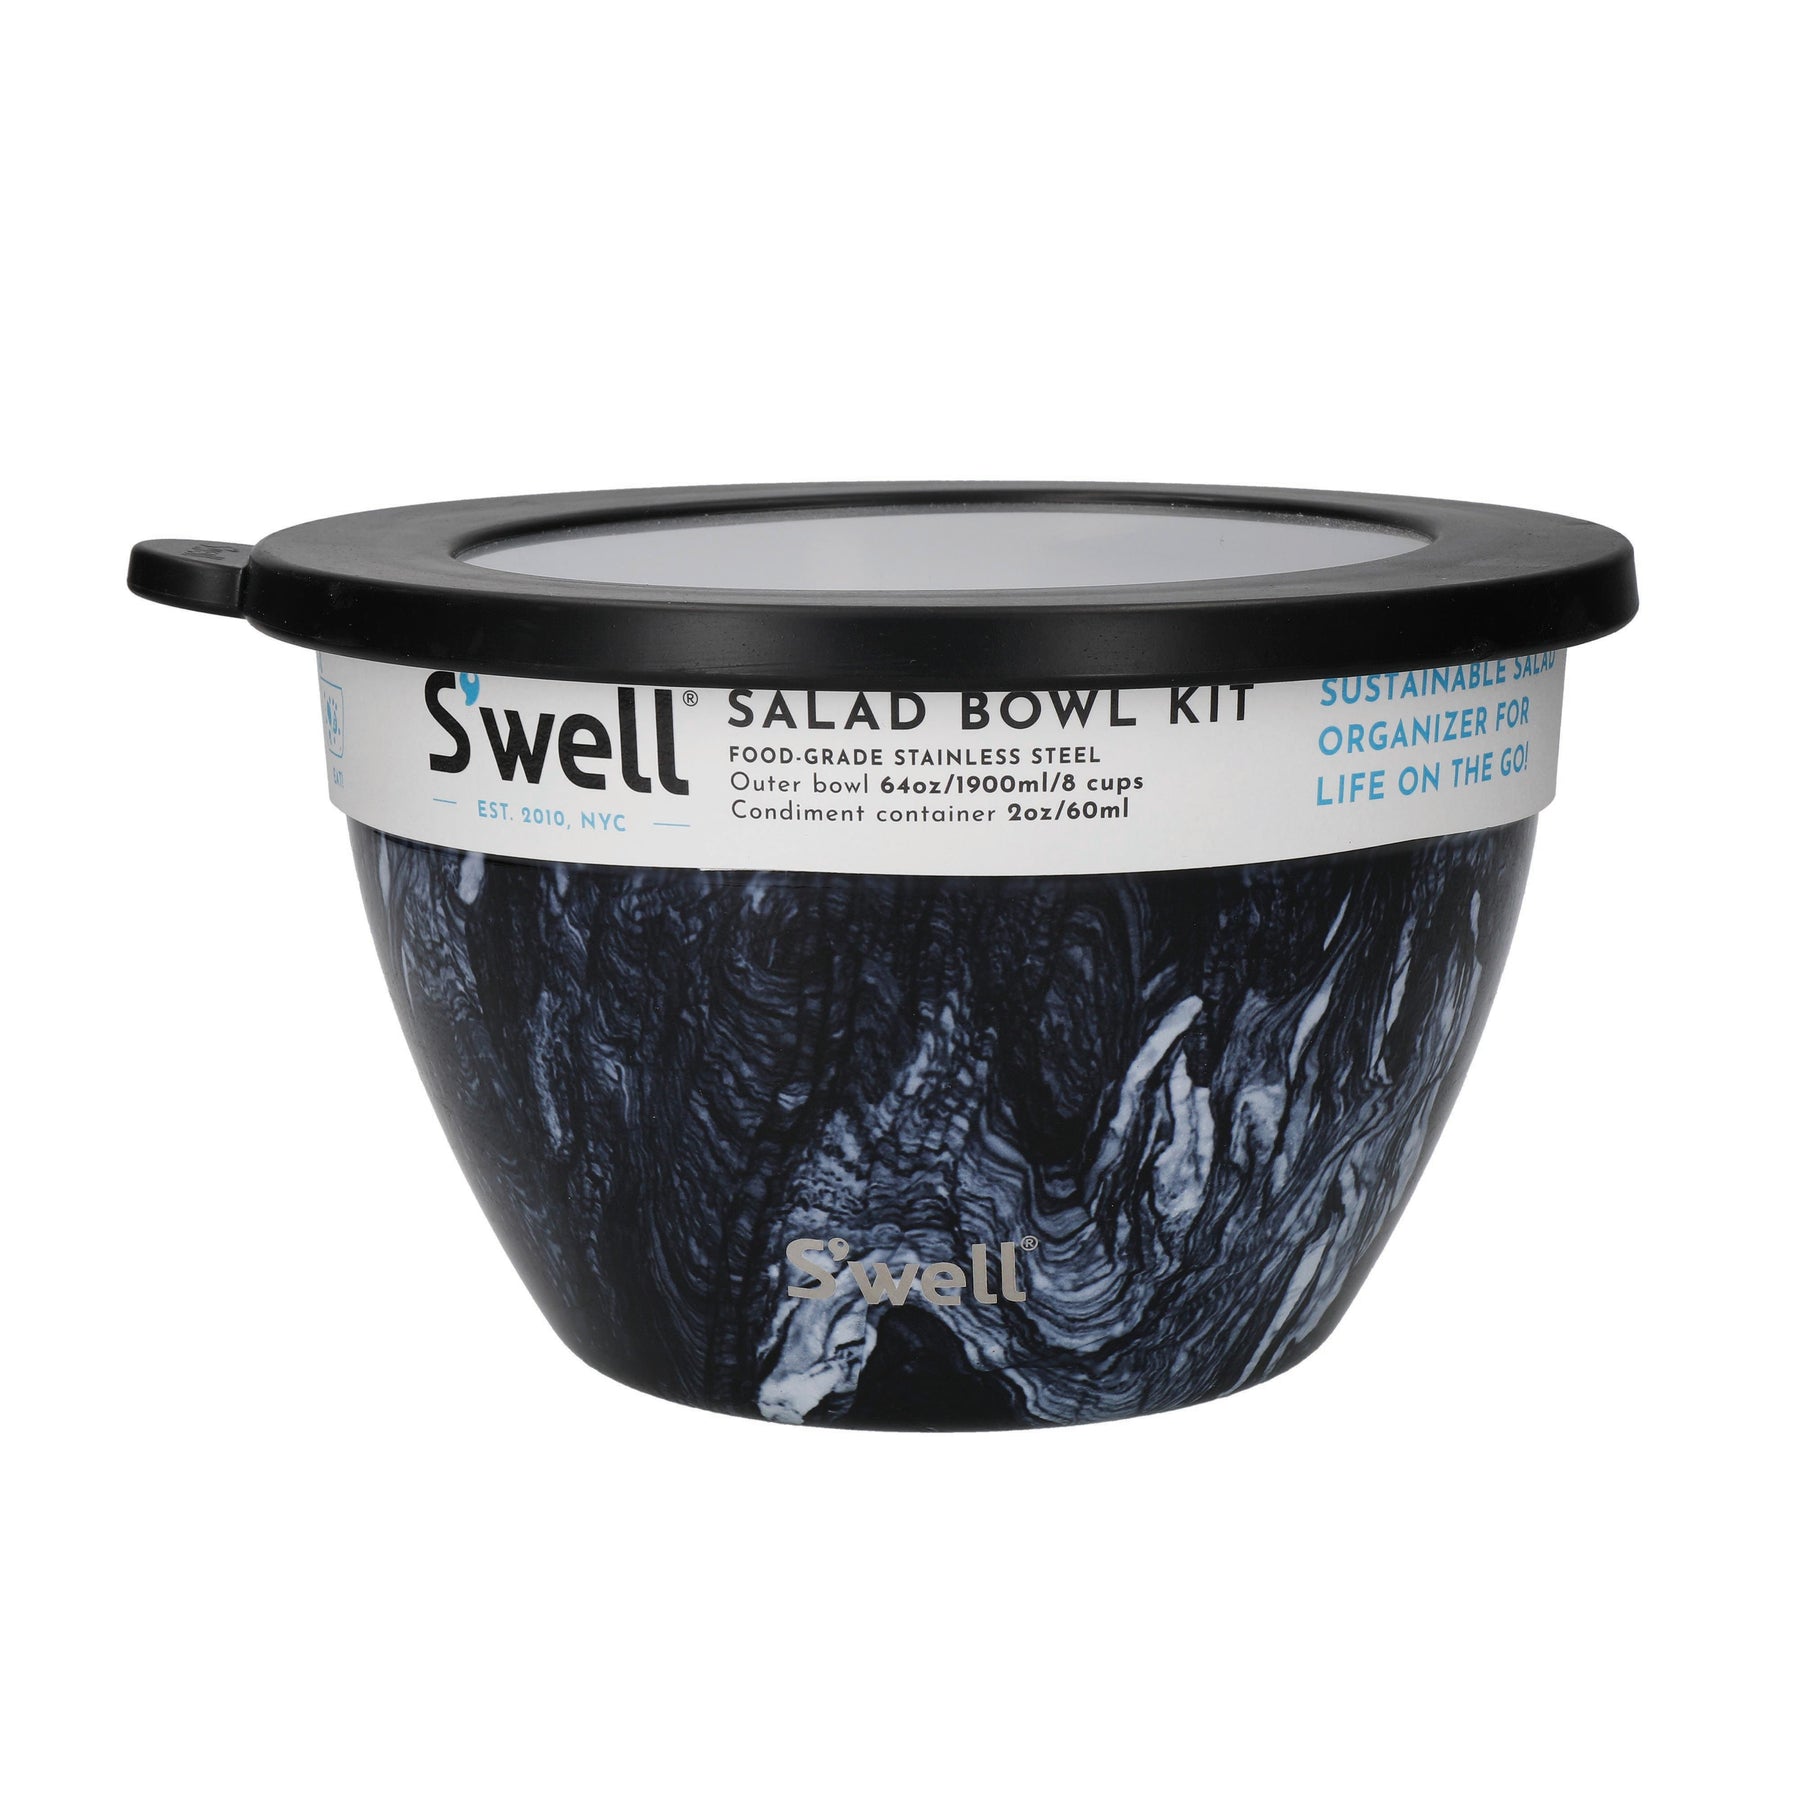  S'well Stainless Steel Salad Bowl Kit - 64oz, Azurite